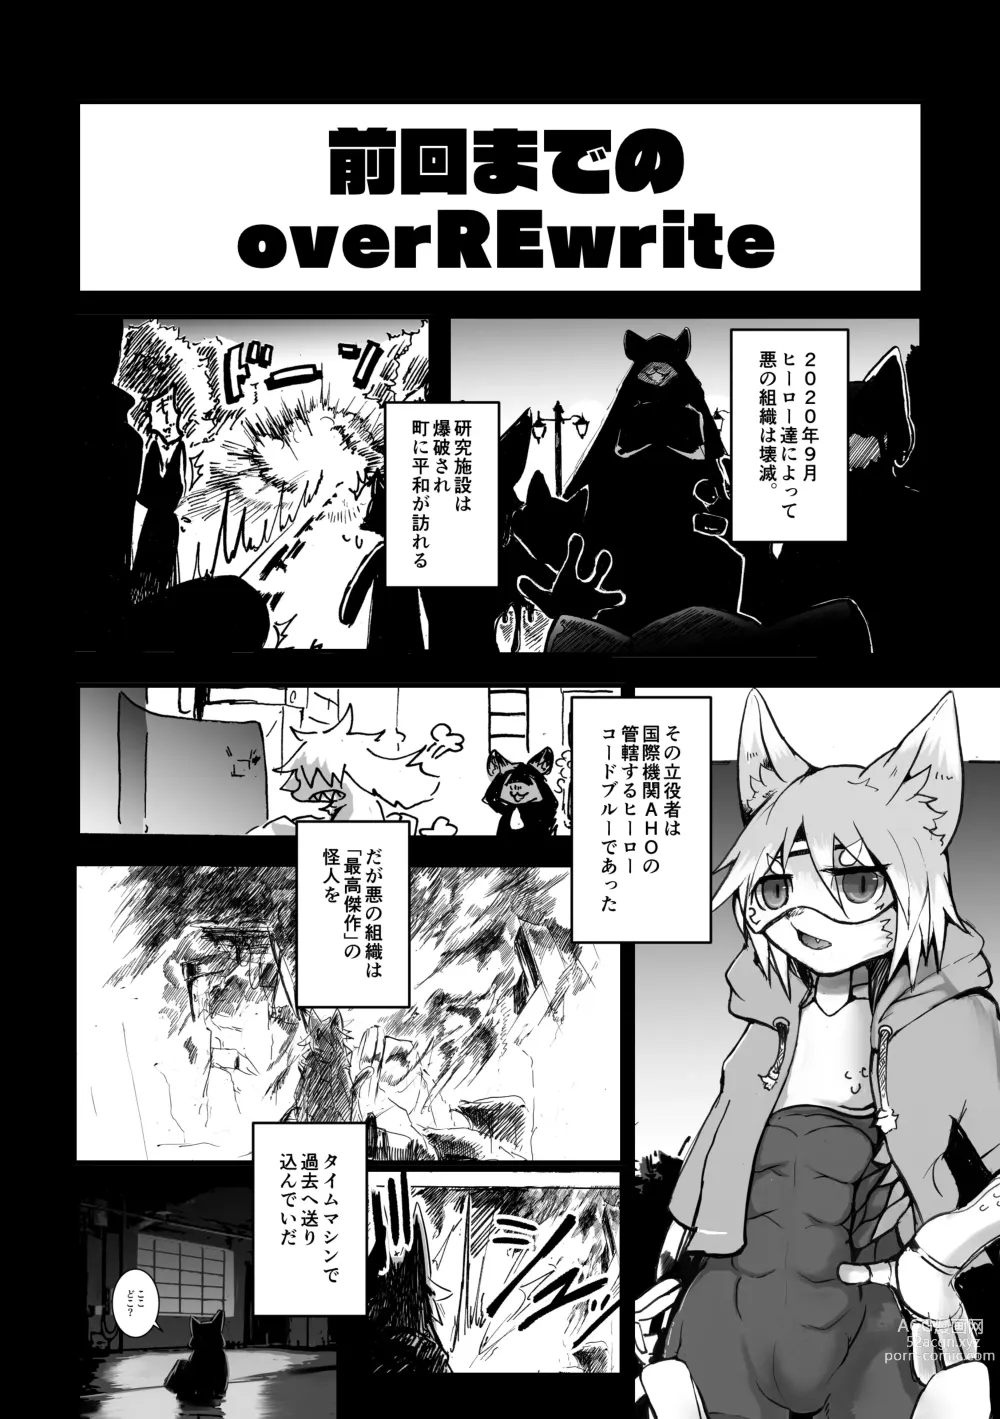 Page 3 of doujinshi over-Re-write 2